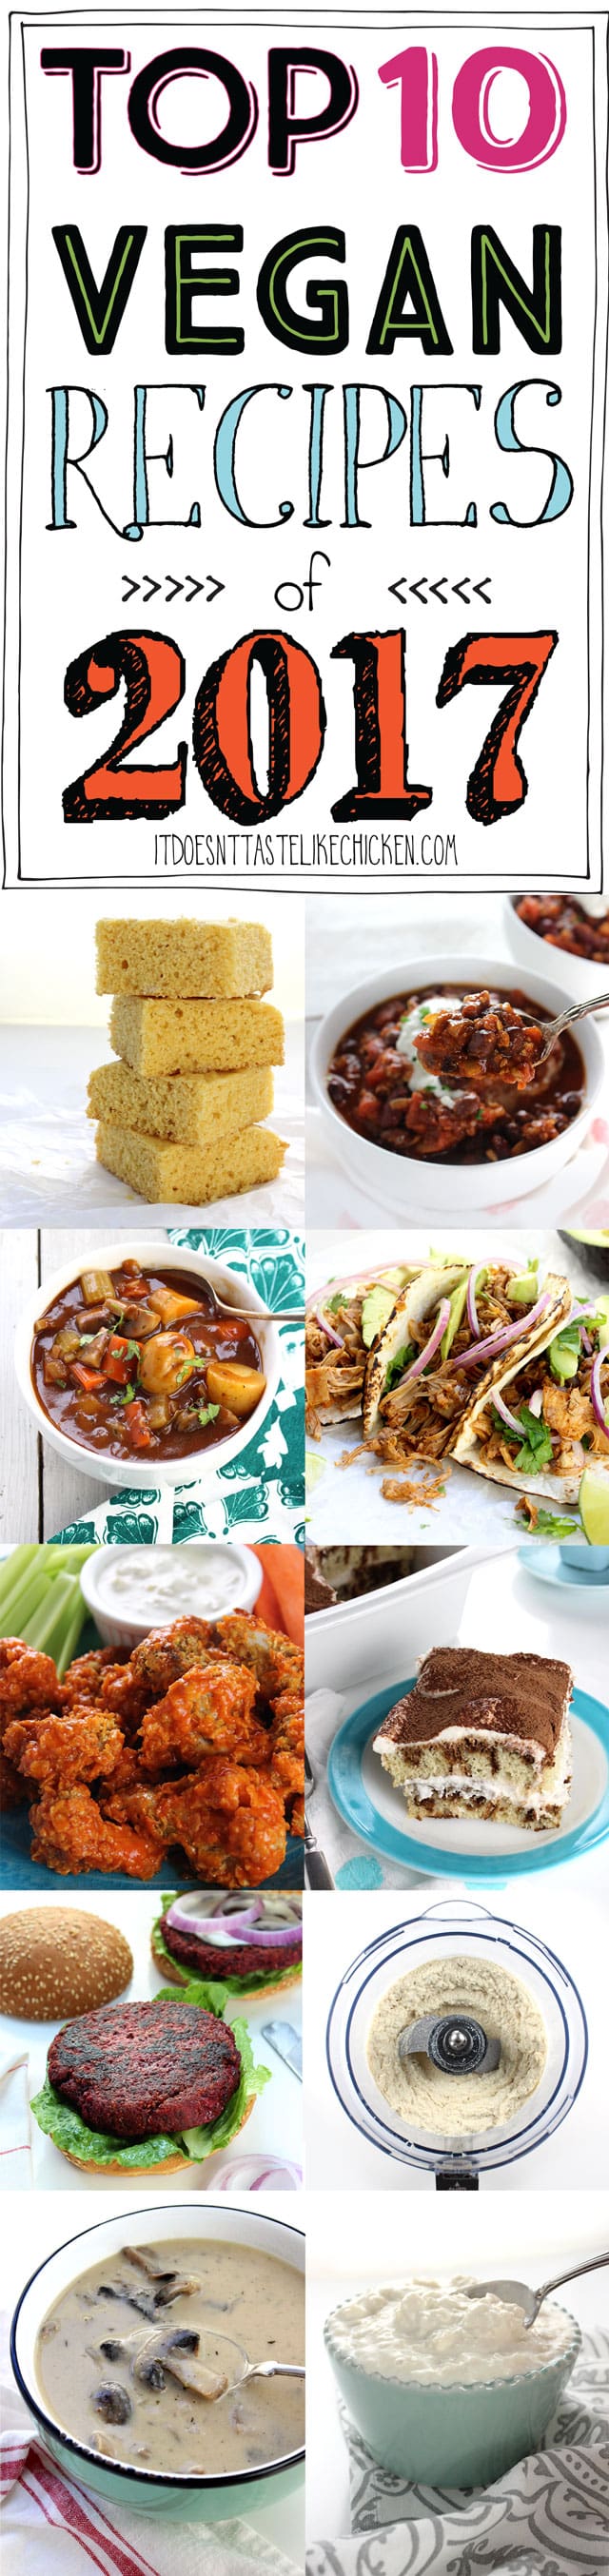 Top 10 Vegan Recipes of 2017!!!!! So many quick and easy, totally delicious vegan and vegetarian recipes. #itdoesnttastelikechicken